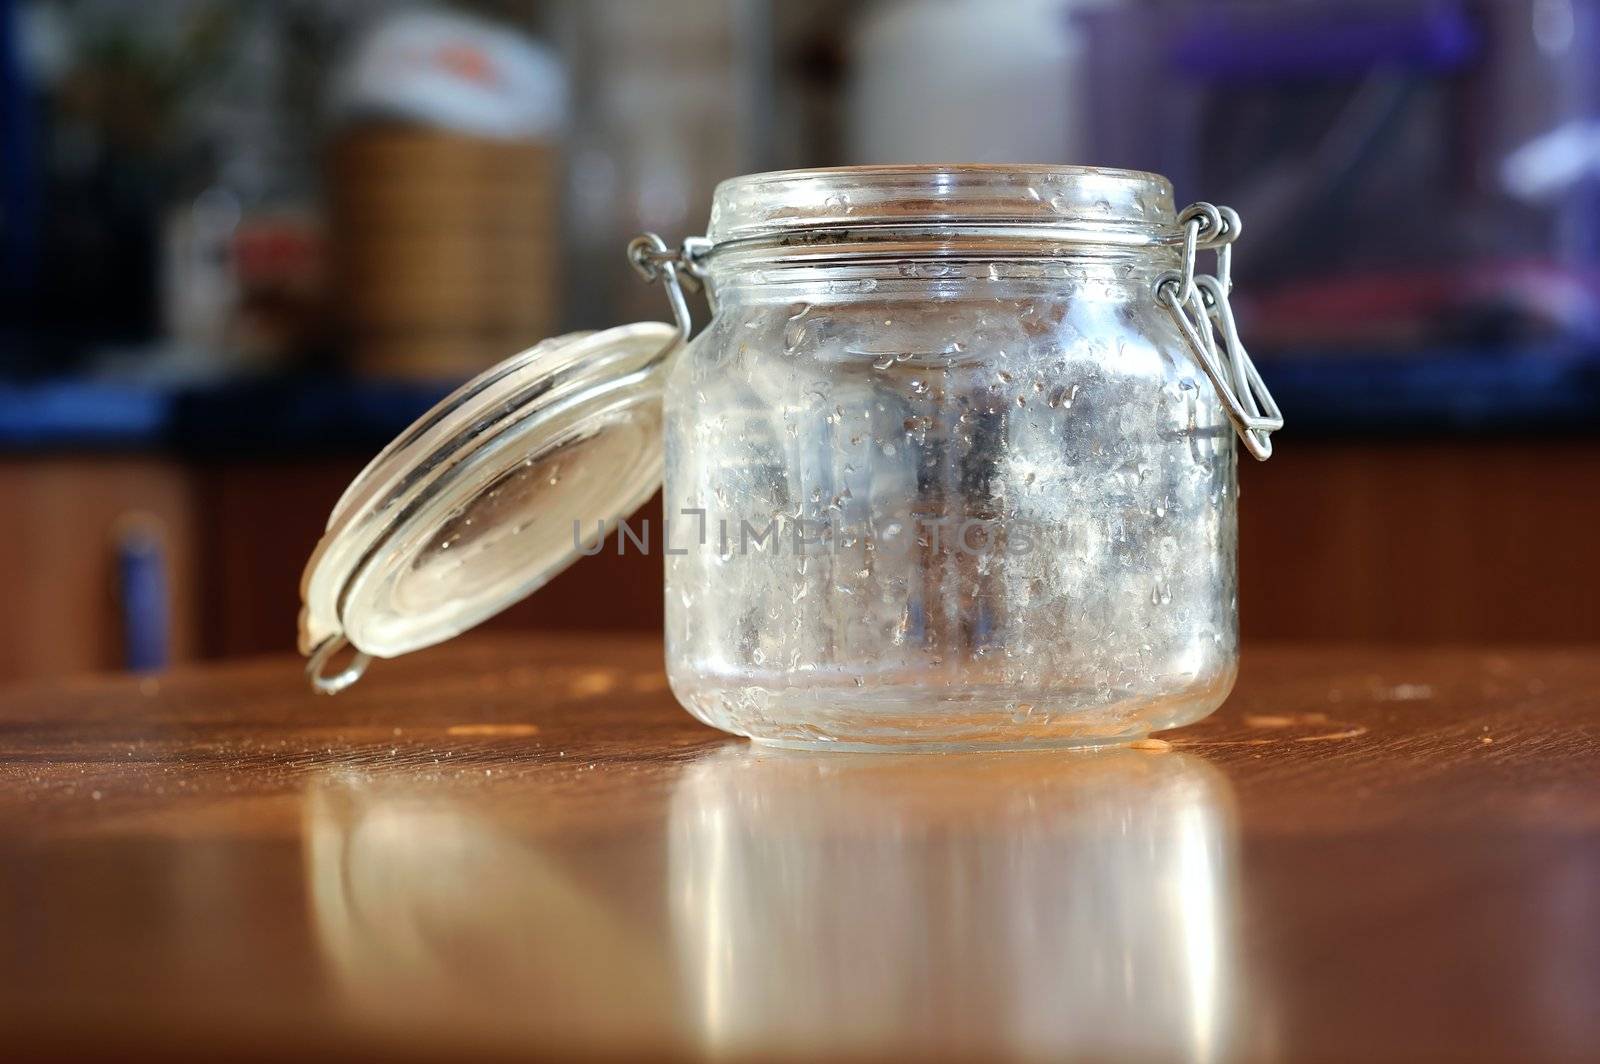 An image of an empty jar on the table